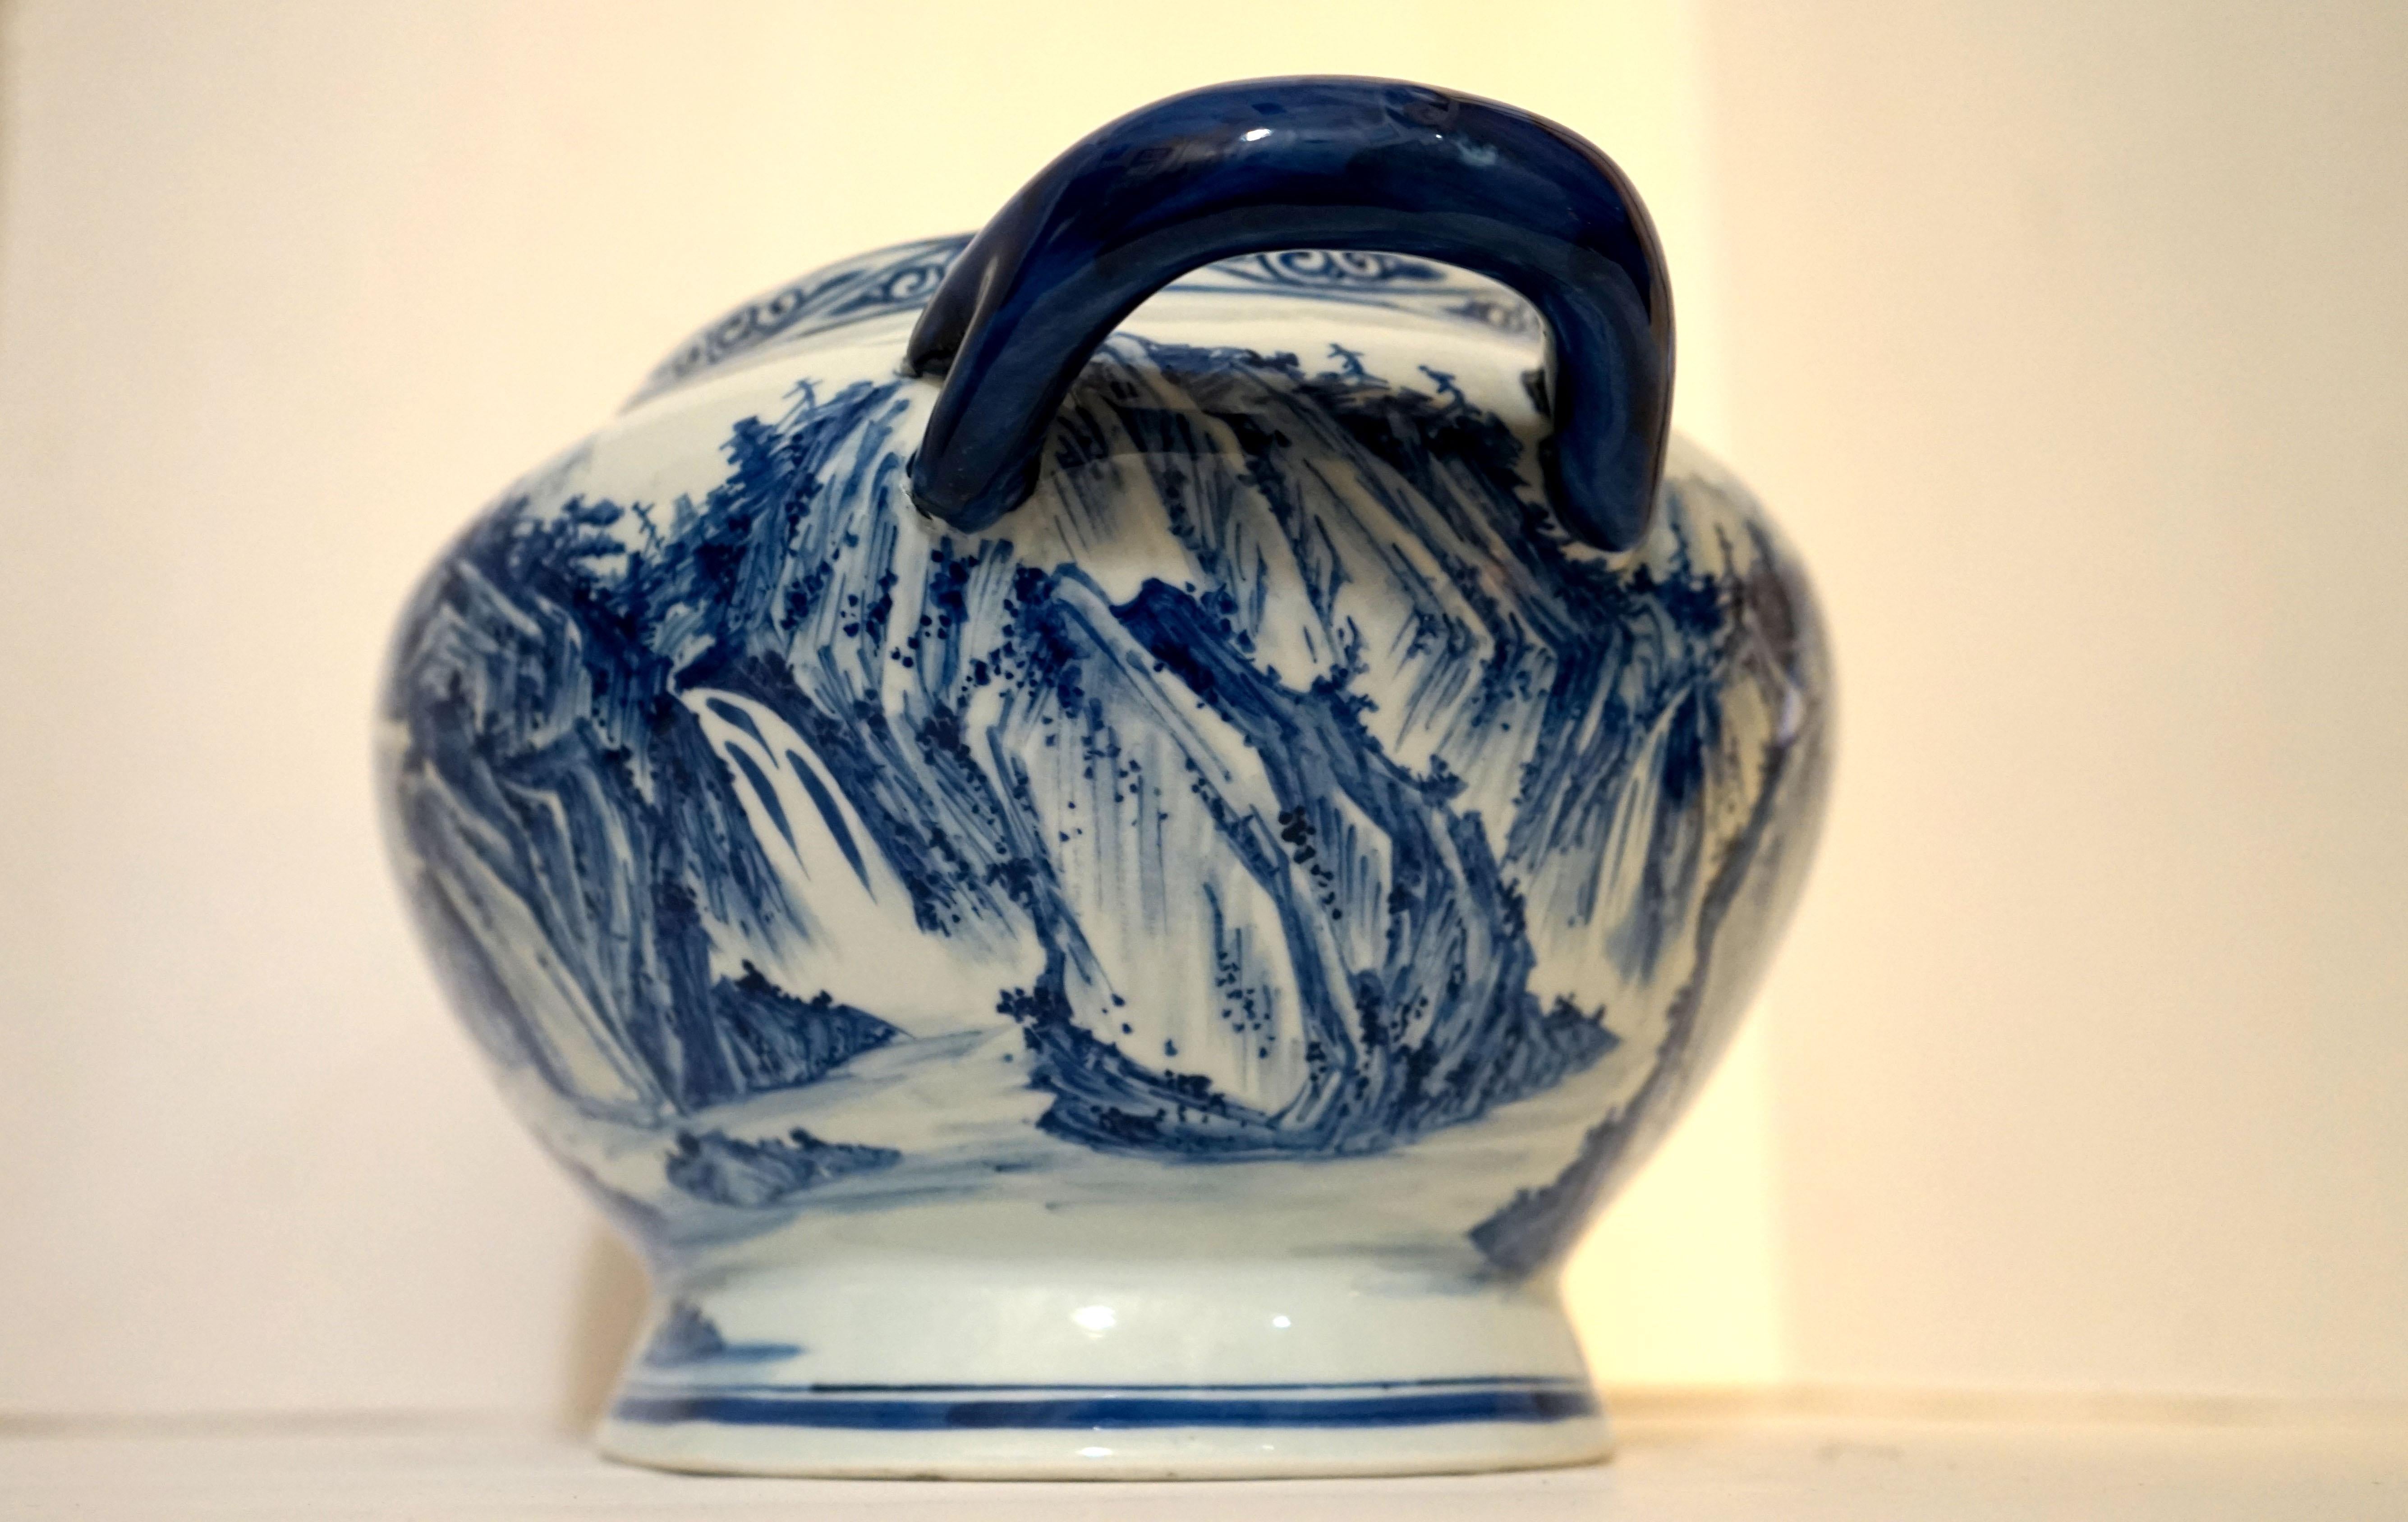 Blue and White Porcelain Soup Tureen with Underplate In Good Condition For Sale In Lomita, CA